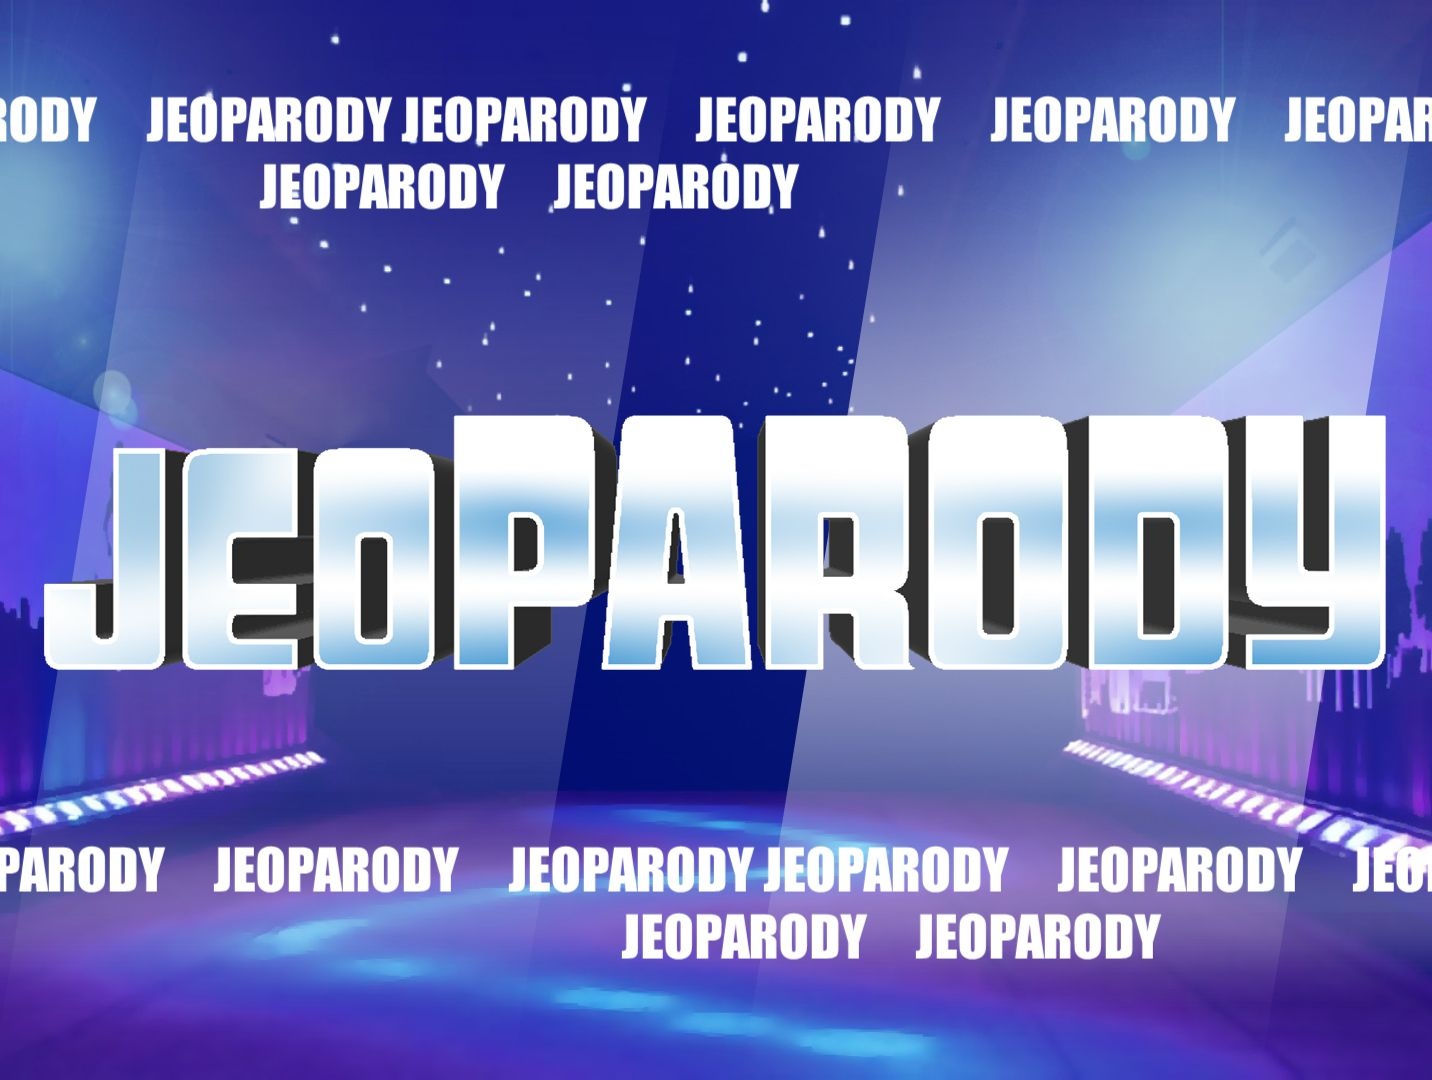 12 Free Jeopardy Templates For The Classroom - Free Printable Jeopardy Template